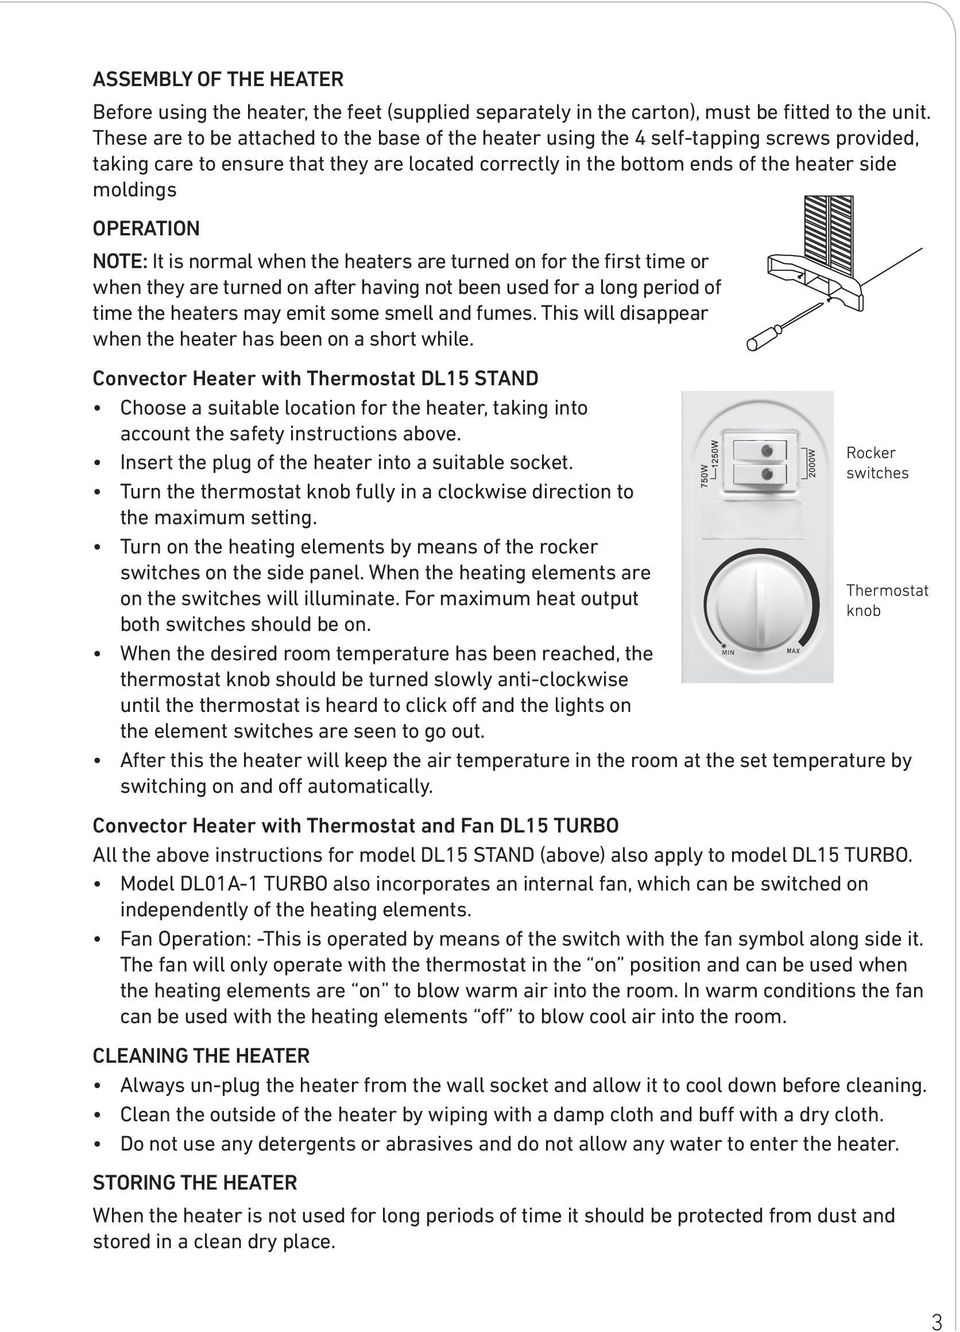 OPERATION NOTE: It is normal when the heaters are turned on for the first time or when they are turned on after having not been used for a long period of time the heaters may emit some smell and